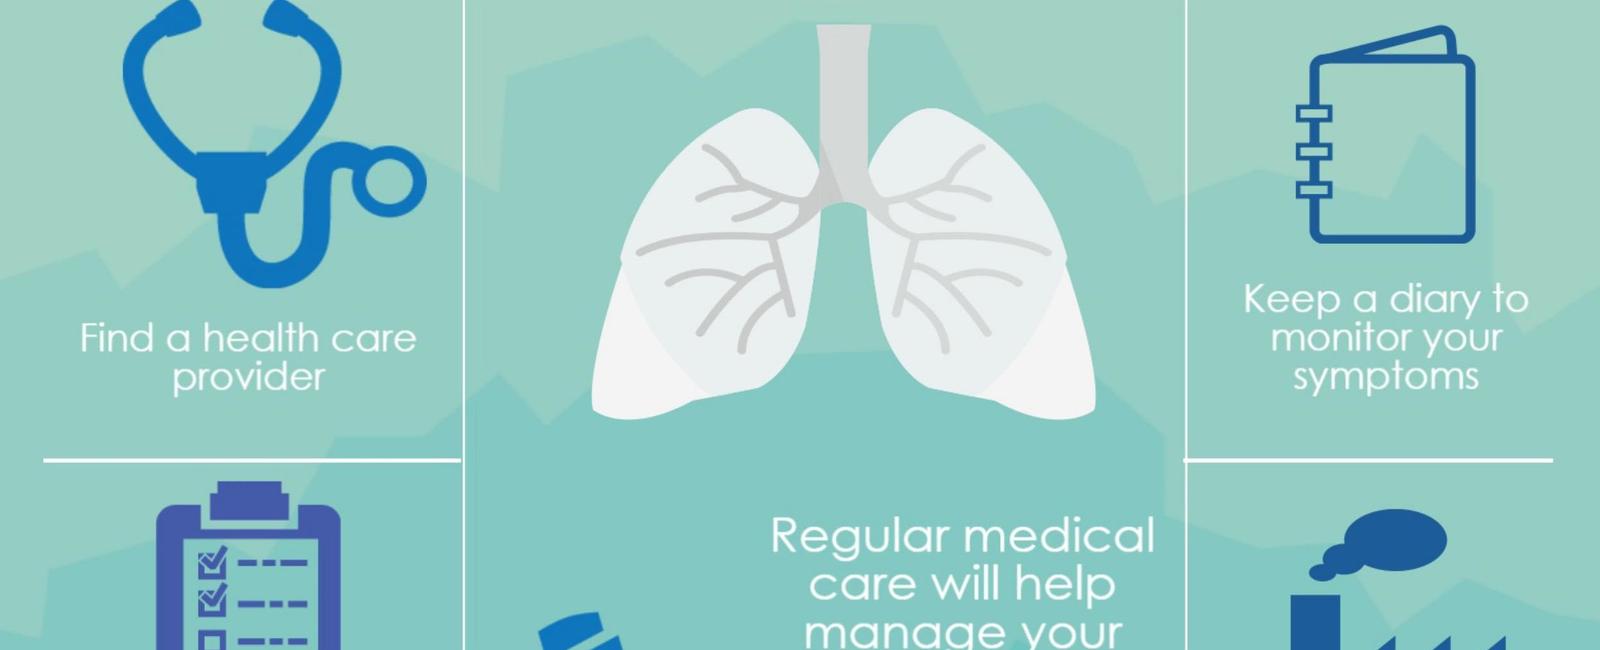 There is no cure for asthma but it can be managed to prevent severe attacks